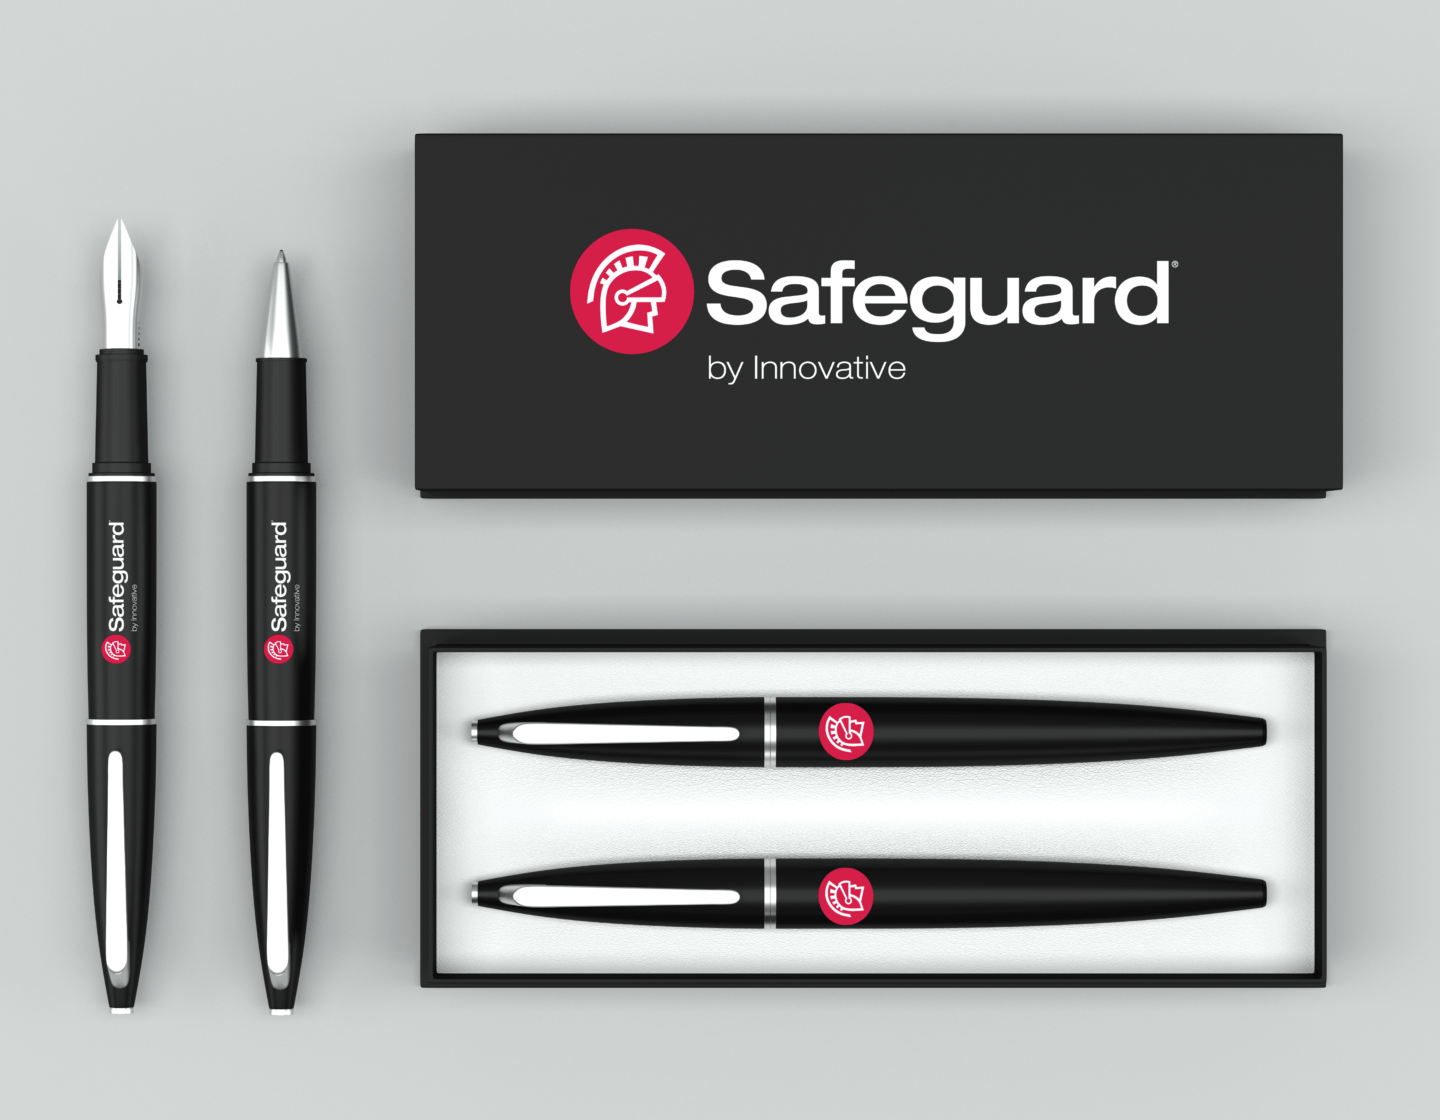 Four Safeguard by Innovative branded pens outside the case.